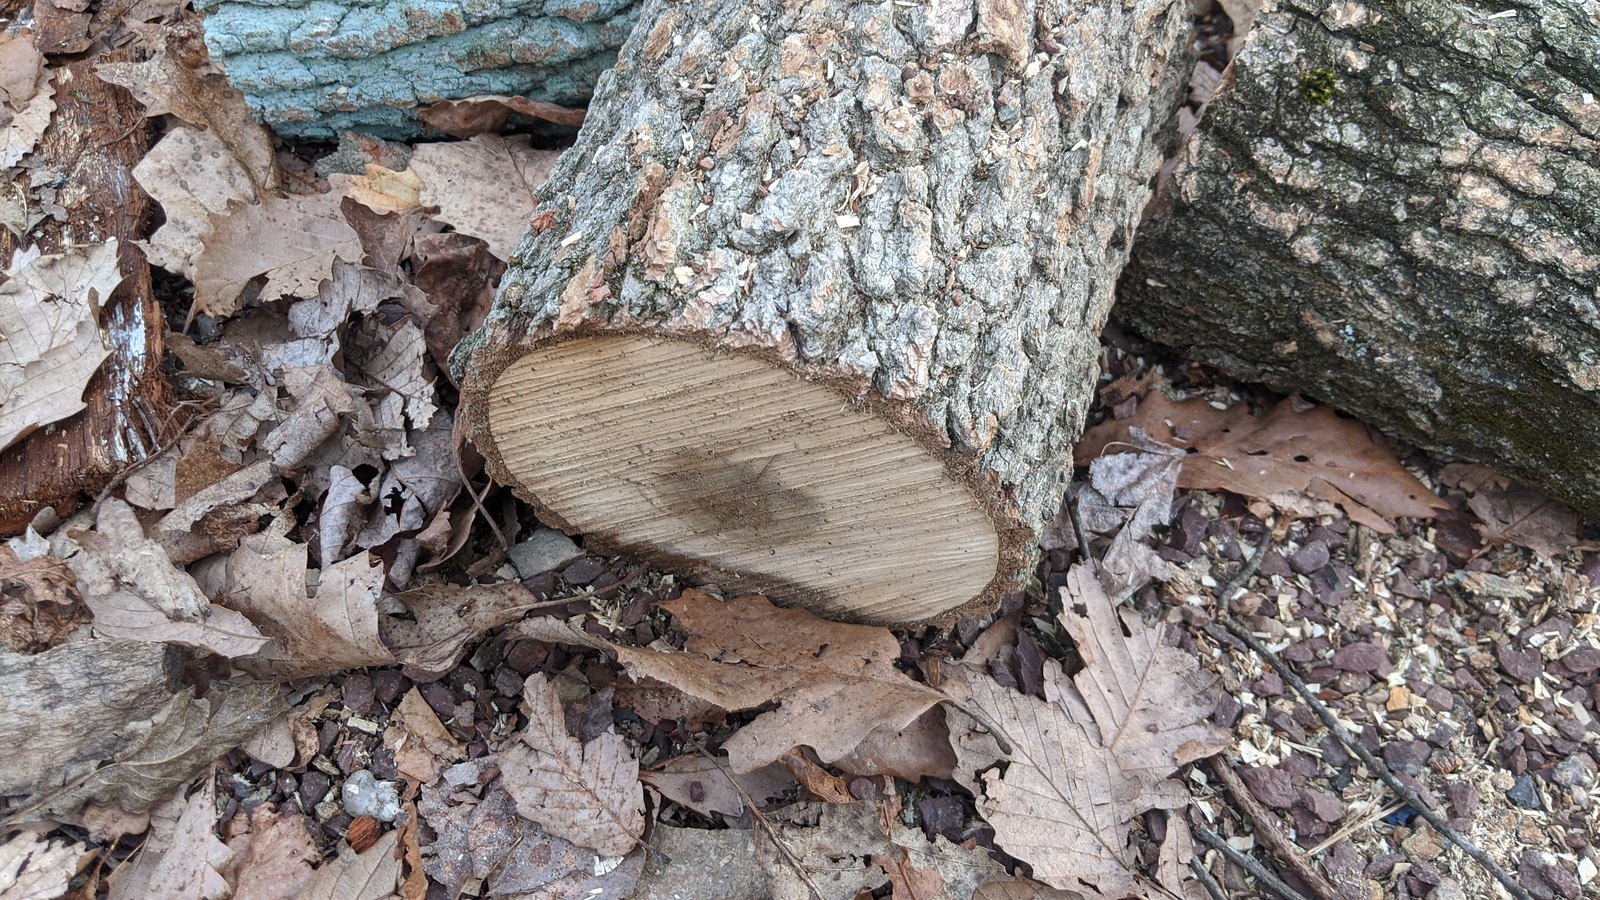 Another wood identification thread